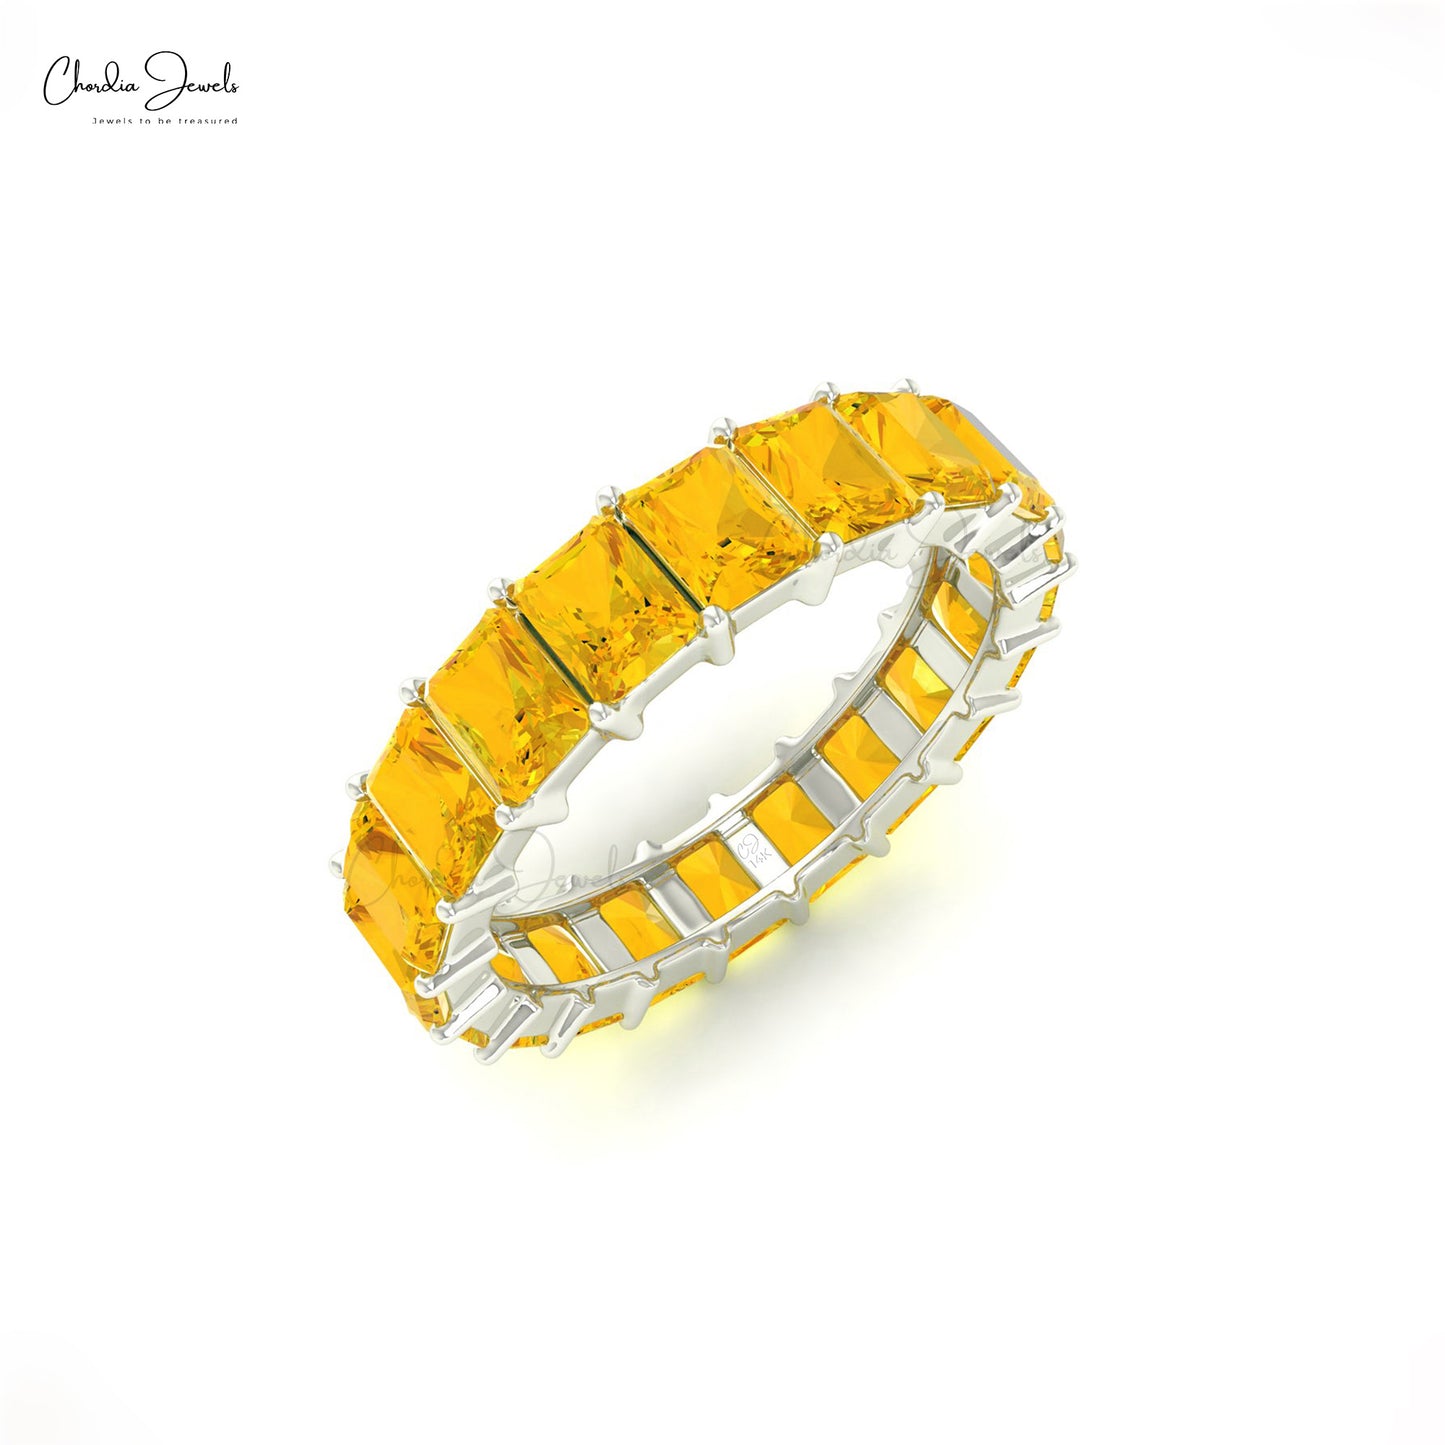 November Birtstone 4x3 mm Emerald Cut Natural Citrine Full Eternity Band Ring in 14k Solid Gold